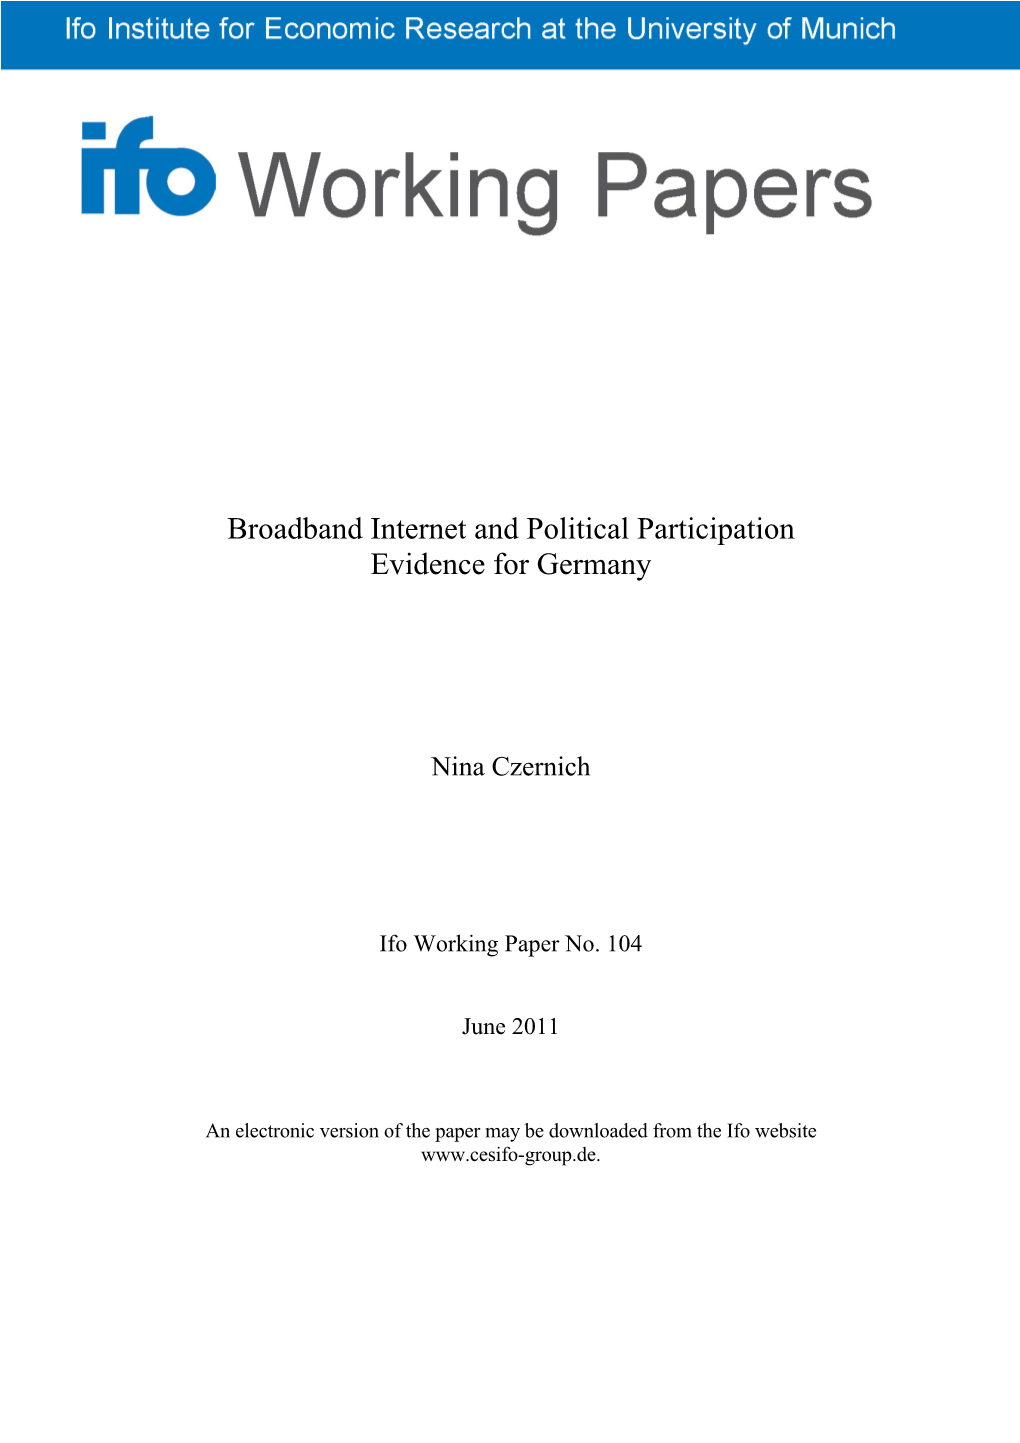 Broadband Internet and Political Participation Evidence for Germany